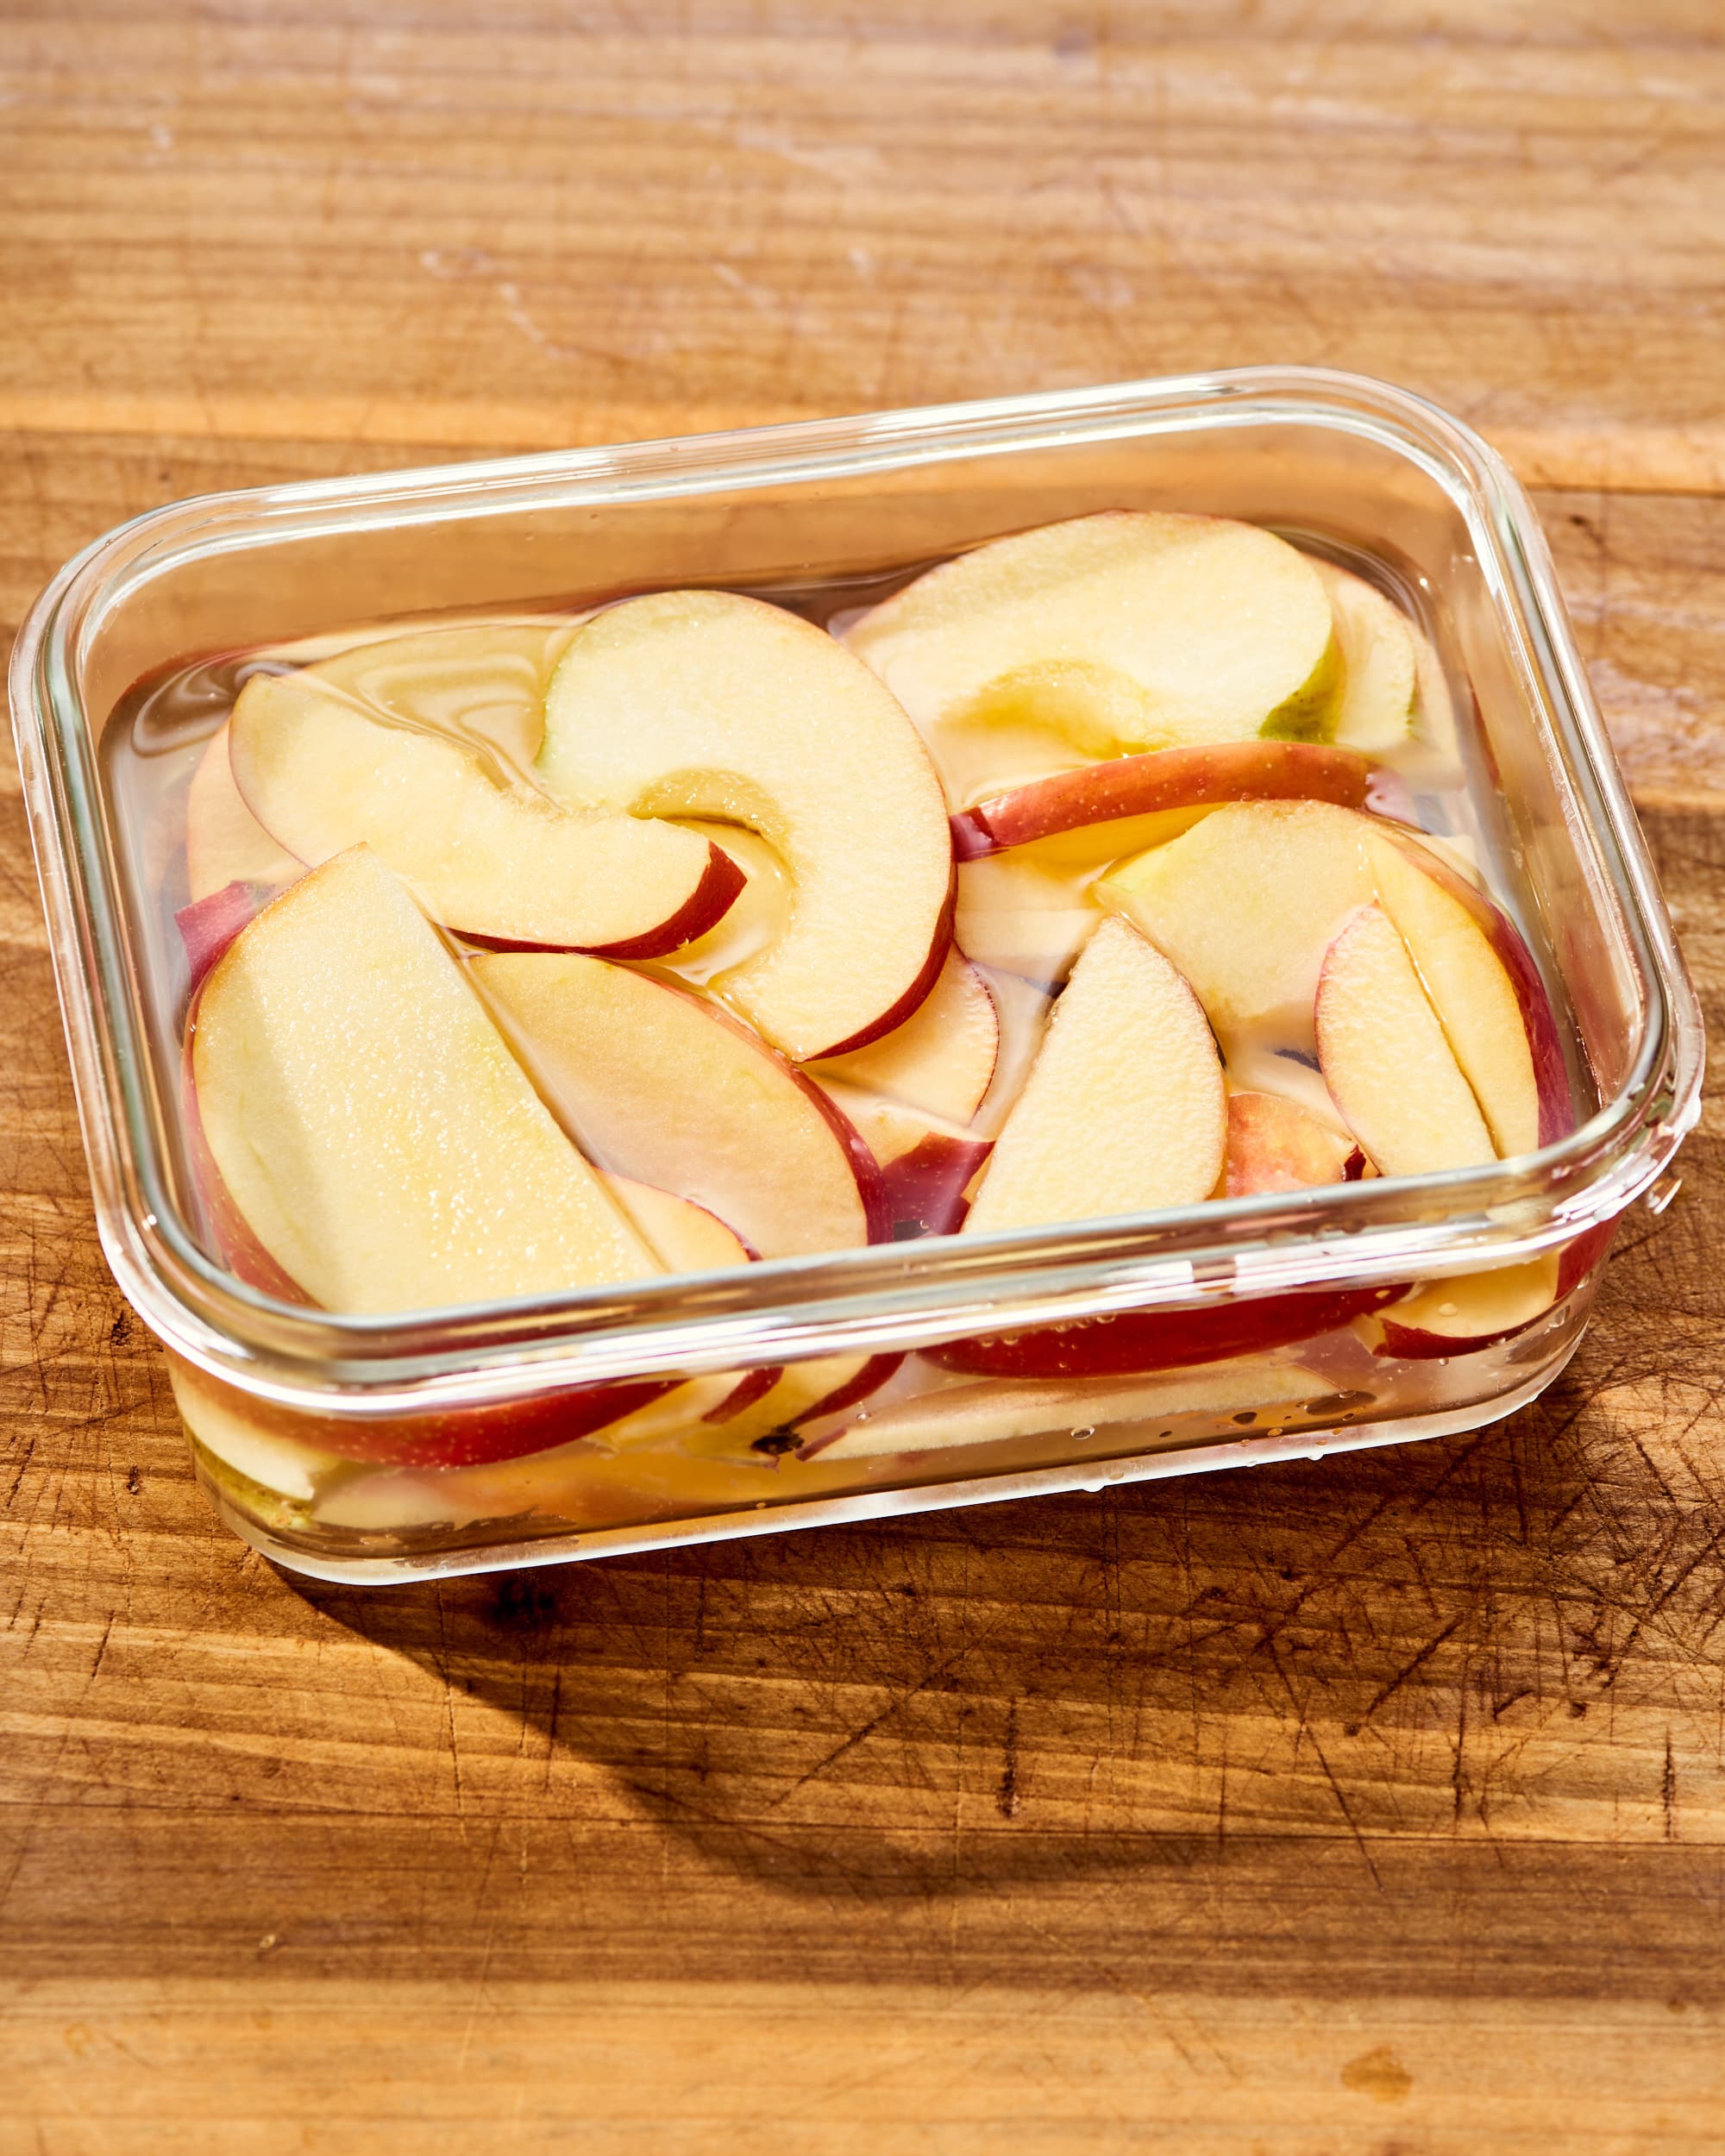 10 Ways to Keep Apple Slices from Browning - Insanely Good